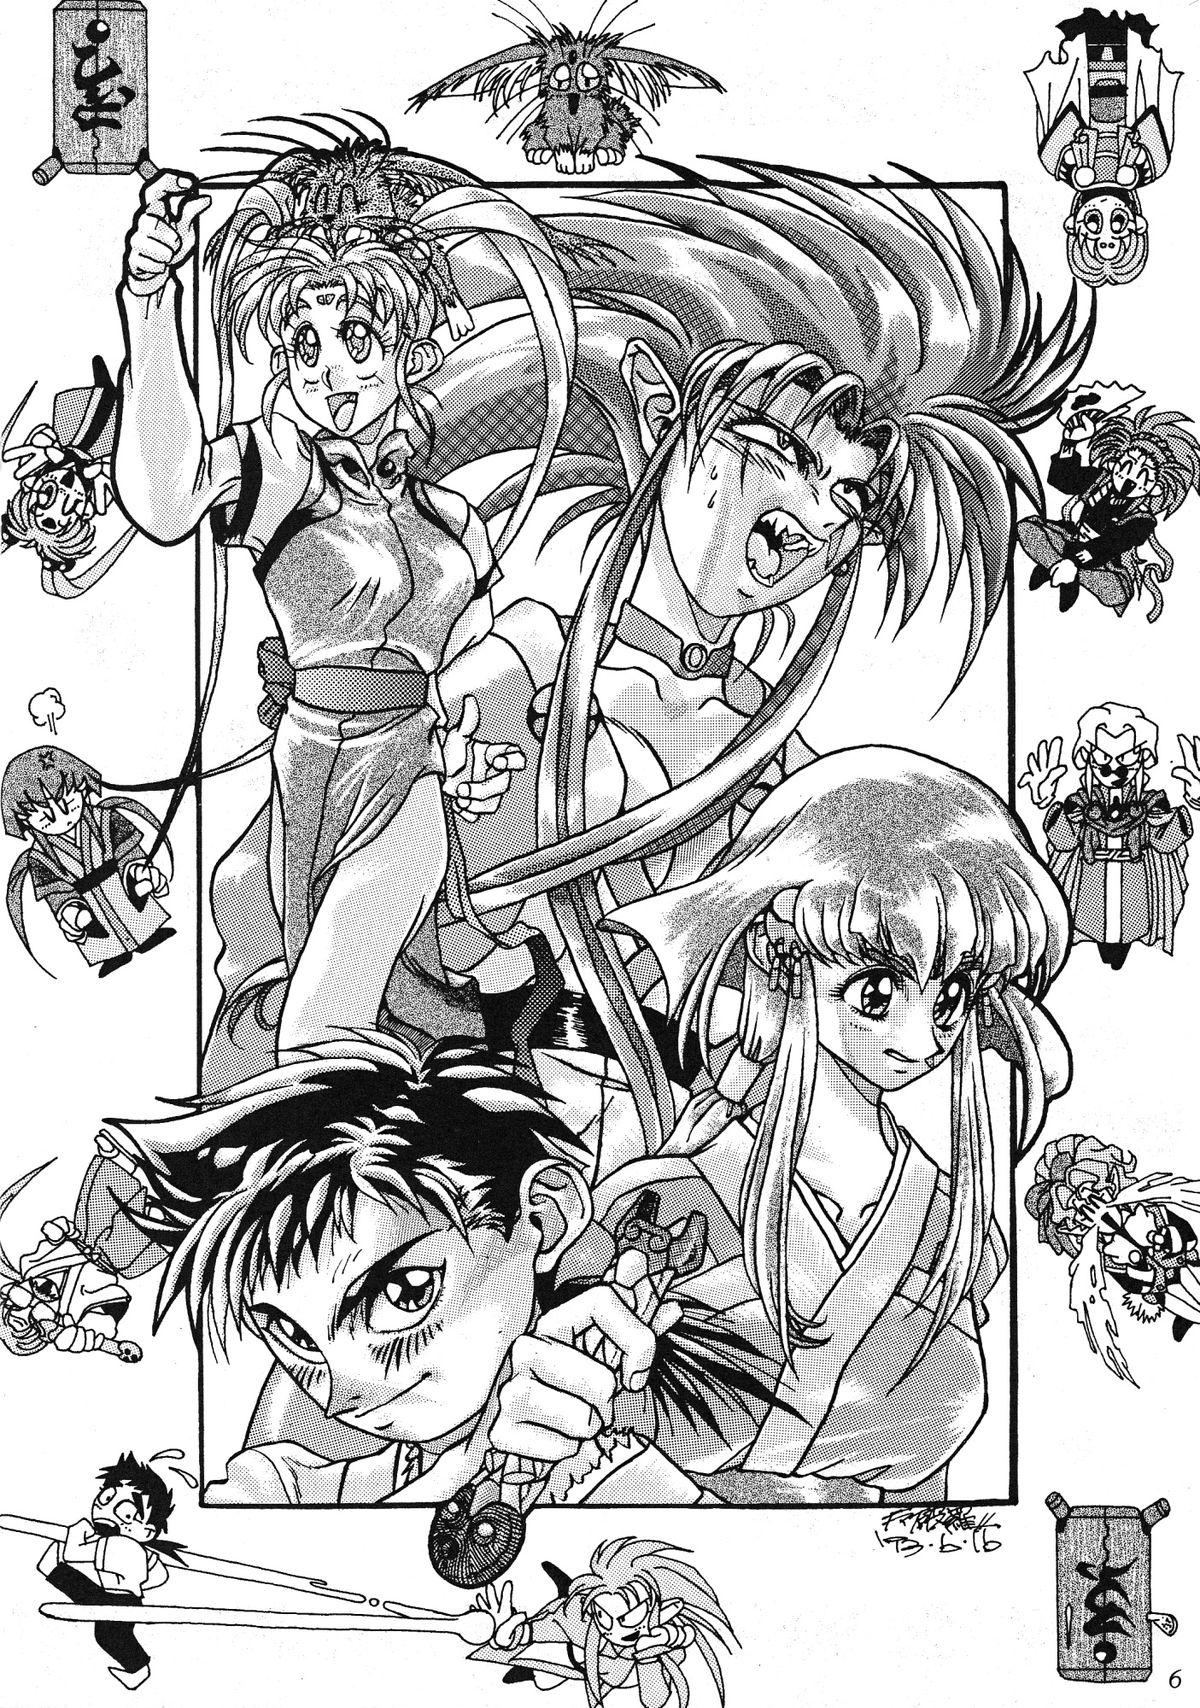 Hardcore Milky Syndrome EX 2 - Sailor moon Tenchi muyo Pretty sammy Ghost sweeper mikami Ng knight lamune and 40 Milf - Page 8